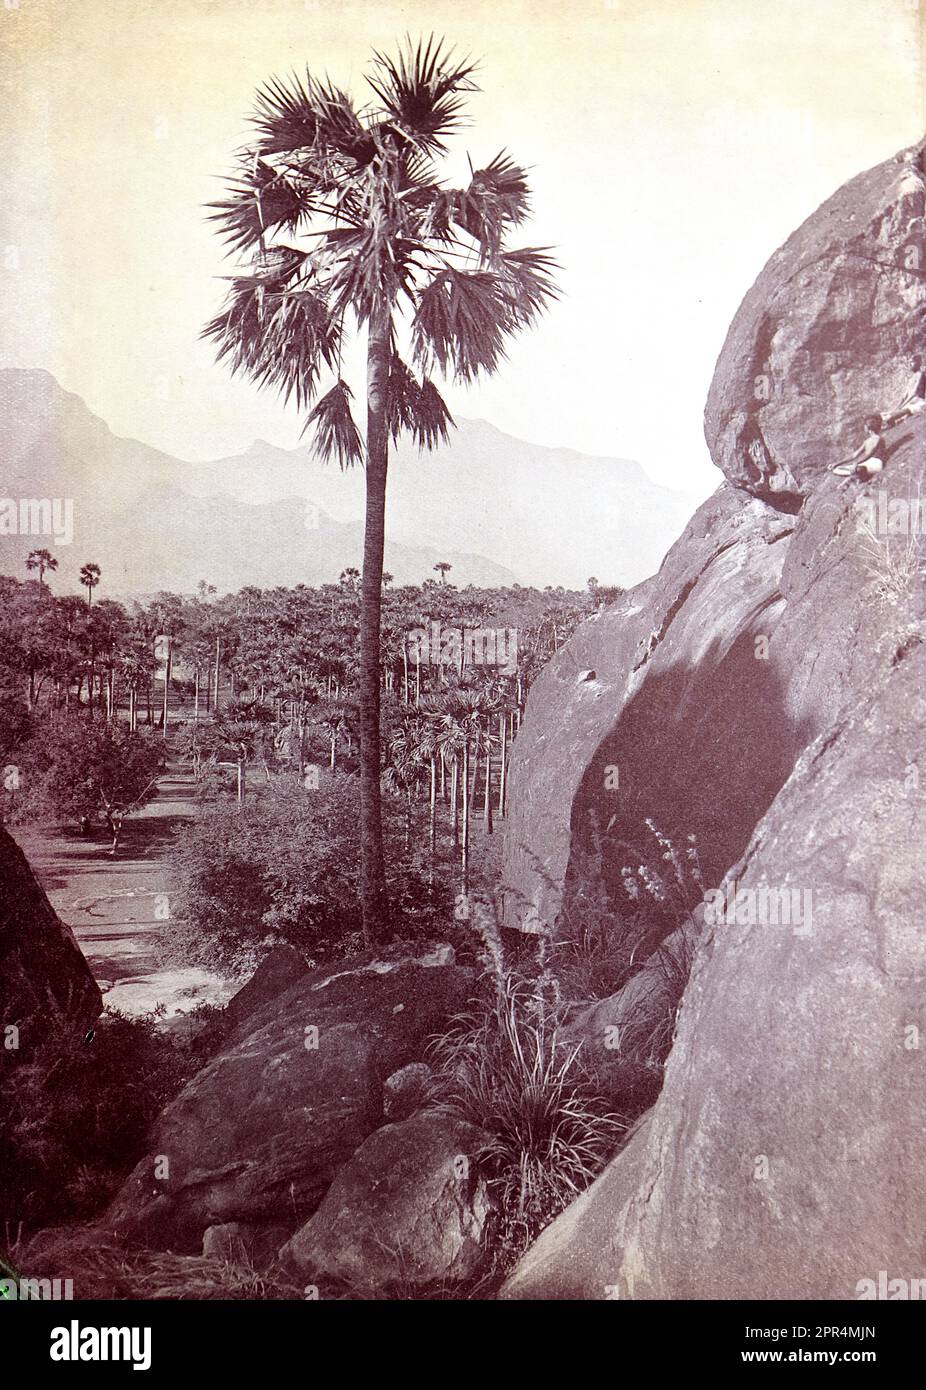 The Great Rock, Dohnavur. Half-tone engraving from a photograph by Mr. Penn of Ootacamund (now known as Ooto), in the Tamil Nadu region of Southern India, c1912. The image relates to the Church of England Zenana Mission’s nursery and compound in Dohnavur, also in Tamil Nadu and about thirty miles from the southern tip of India. The compound was run by Amy Wilson-Carmichael and sought to promote Christianity among babies and children (at the time only girls, many who were victims of temple prostitution). Stock Photo